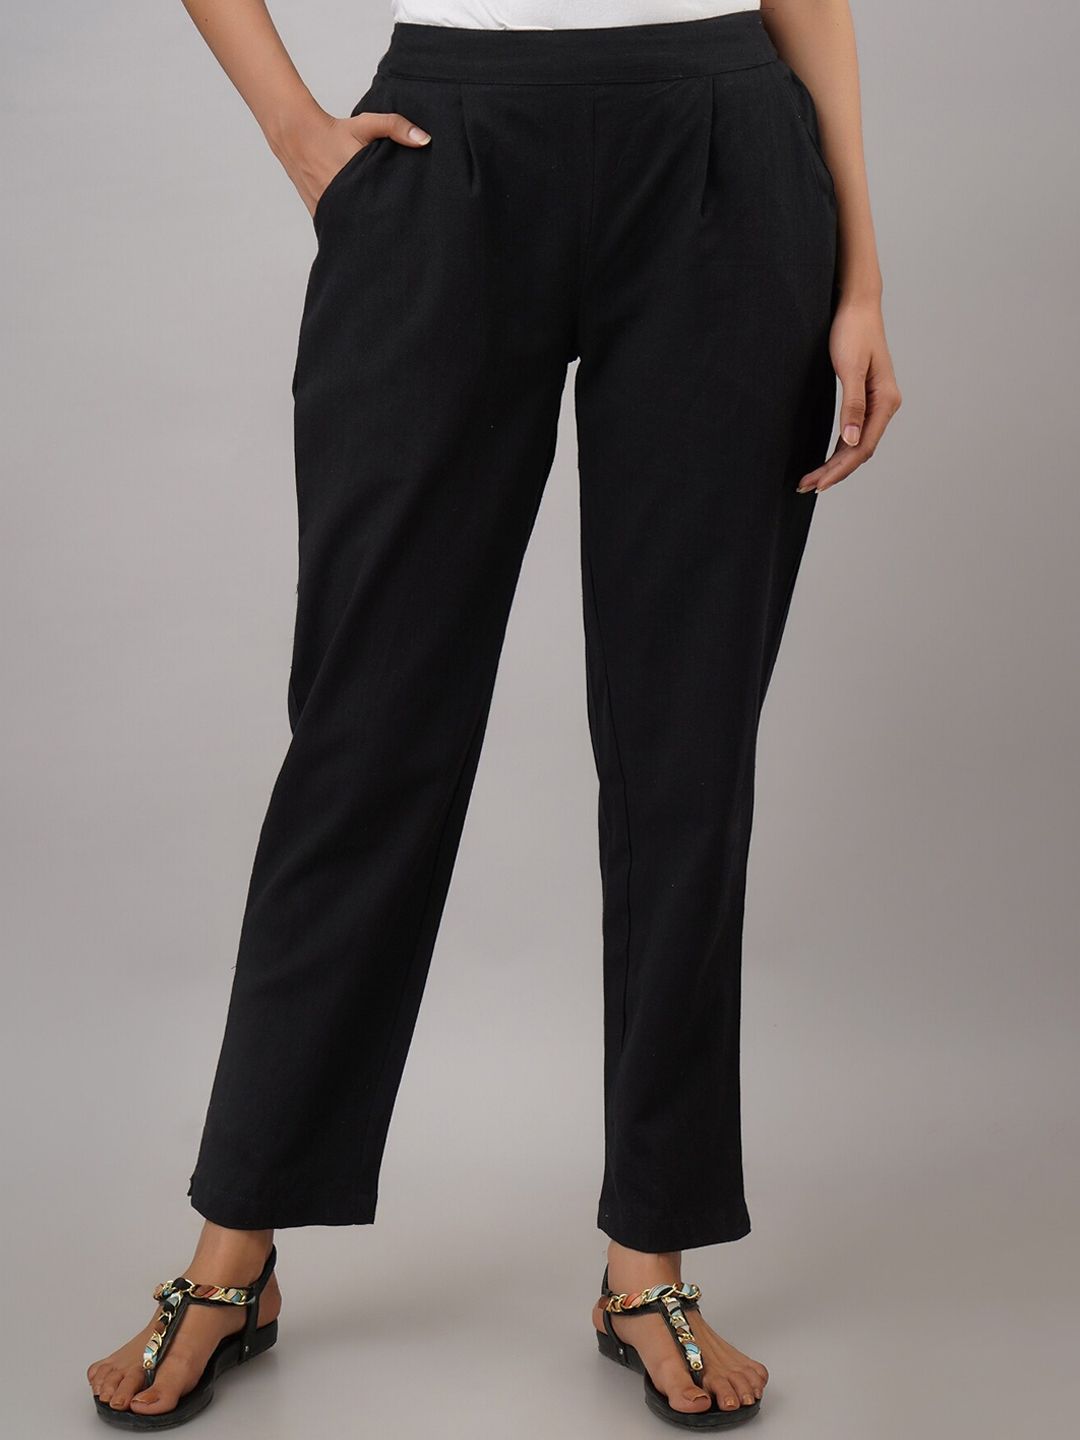 FabbibaPrints Women Cotton Solid Trousers Price in India